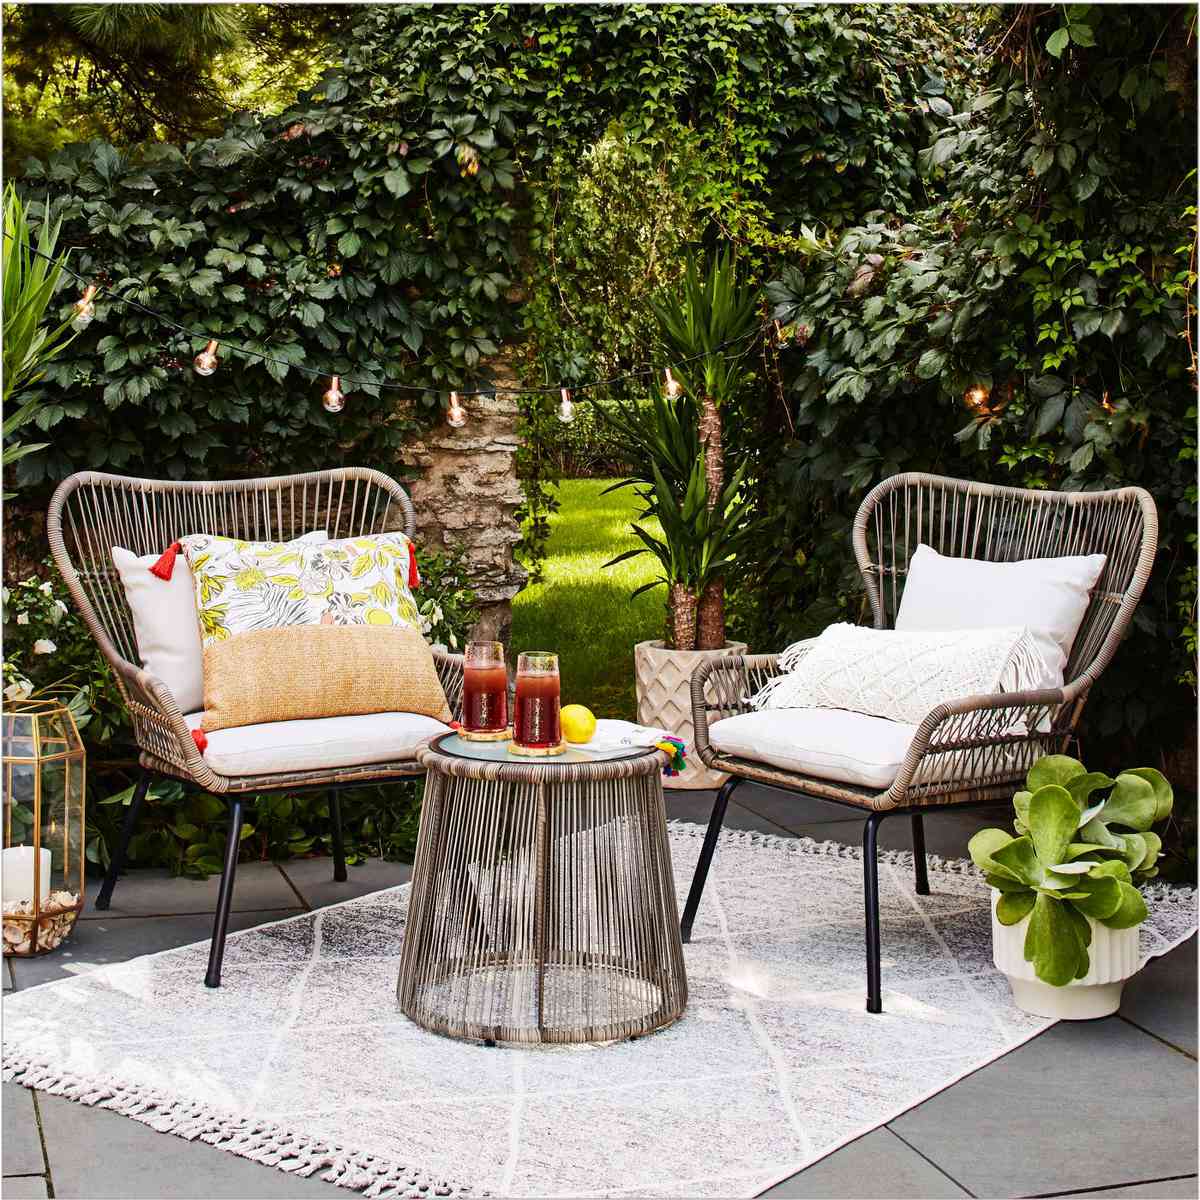 Best Outdoor Furniture For Small Spaces, Low Profile Outdoor Patio Furniture